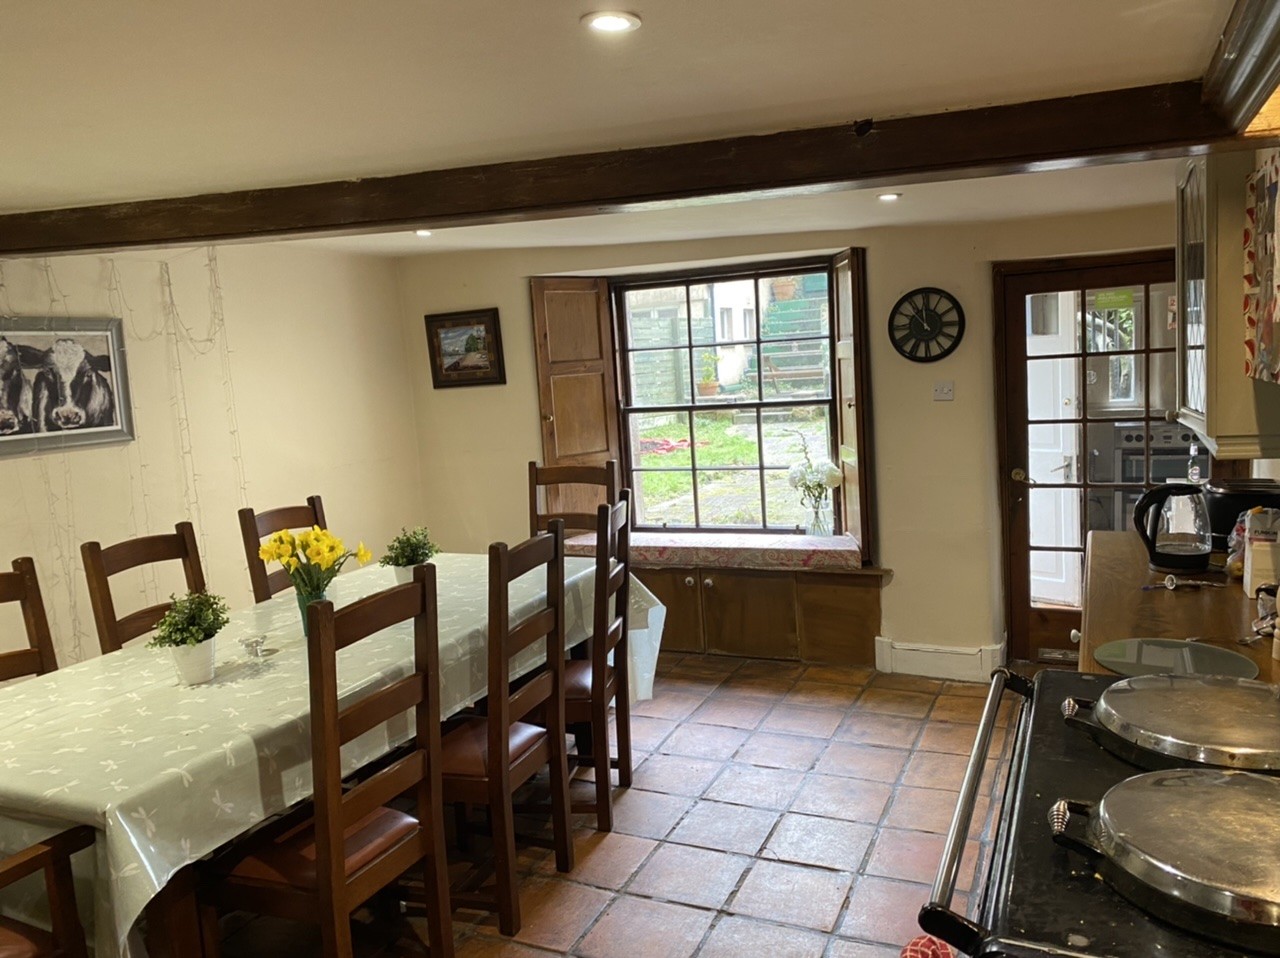 Large kitchen with Aga